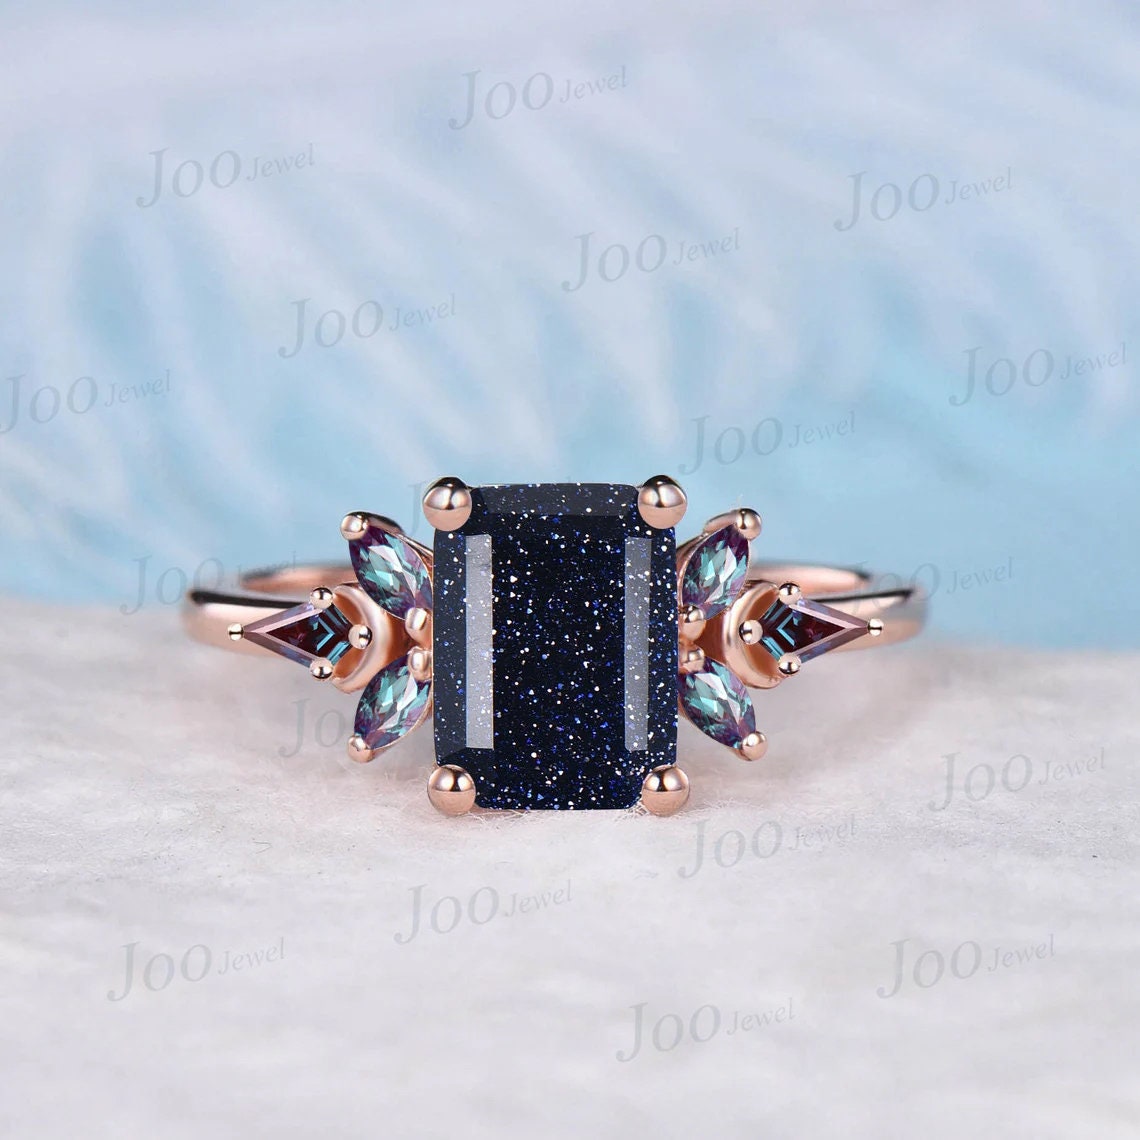 2ct Emerald Cut Galaxy Blue Sandstone Engagement Ring Vintage Cluster Kite Alexandrite Moon Ring Personalized Handmade Proposal Gifts Women